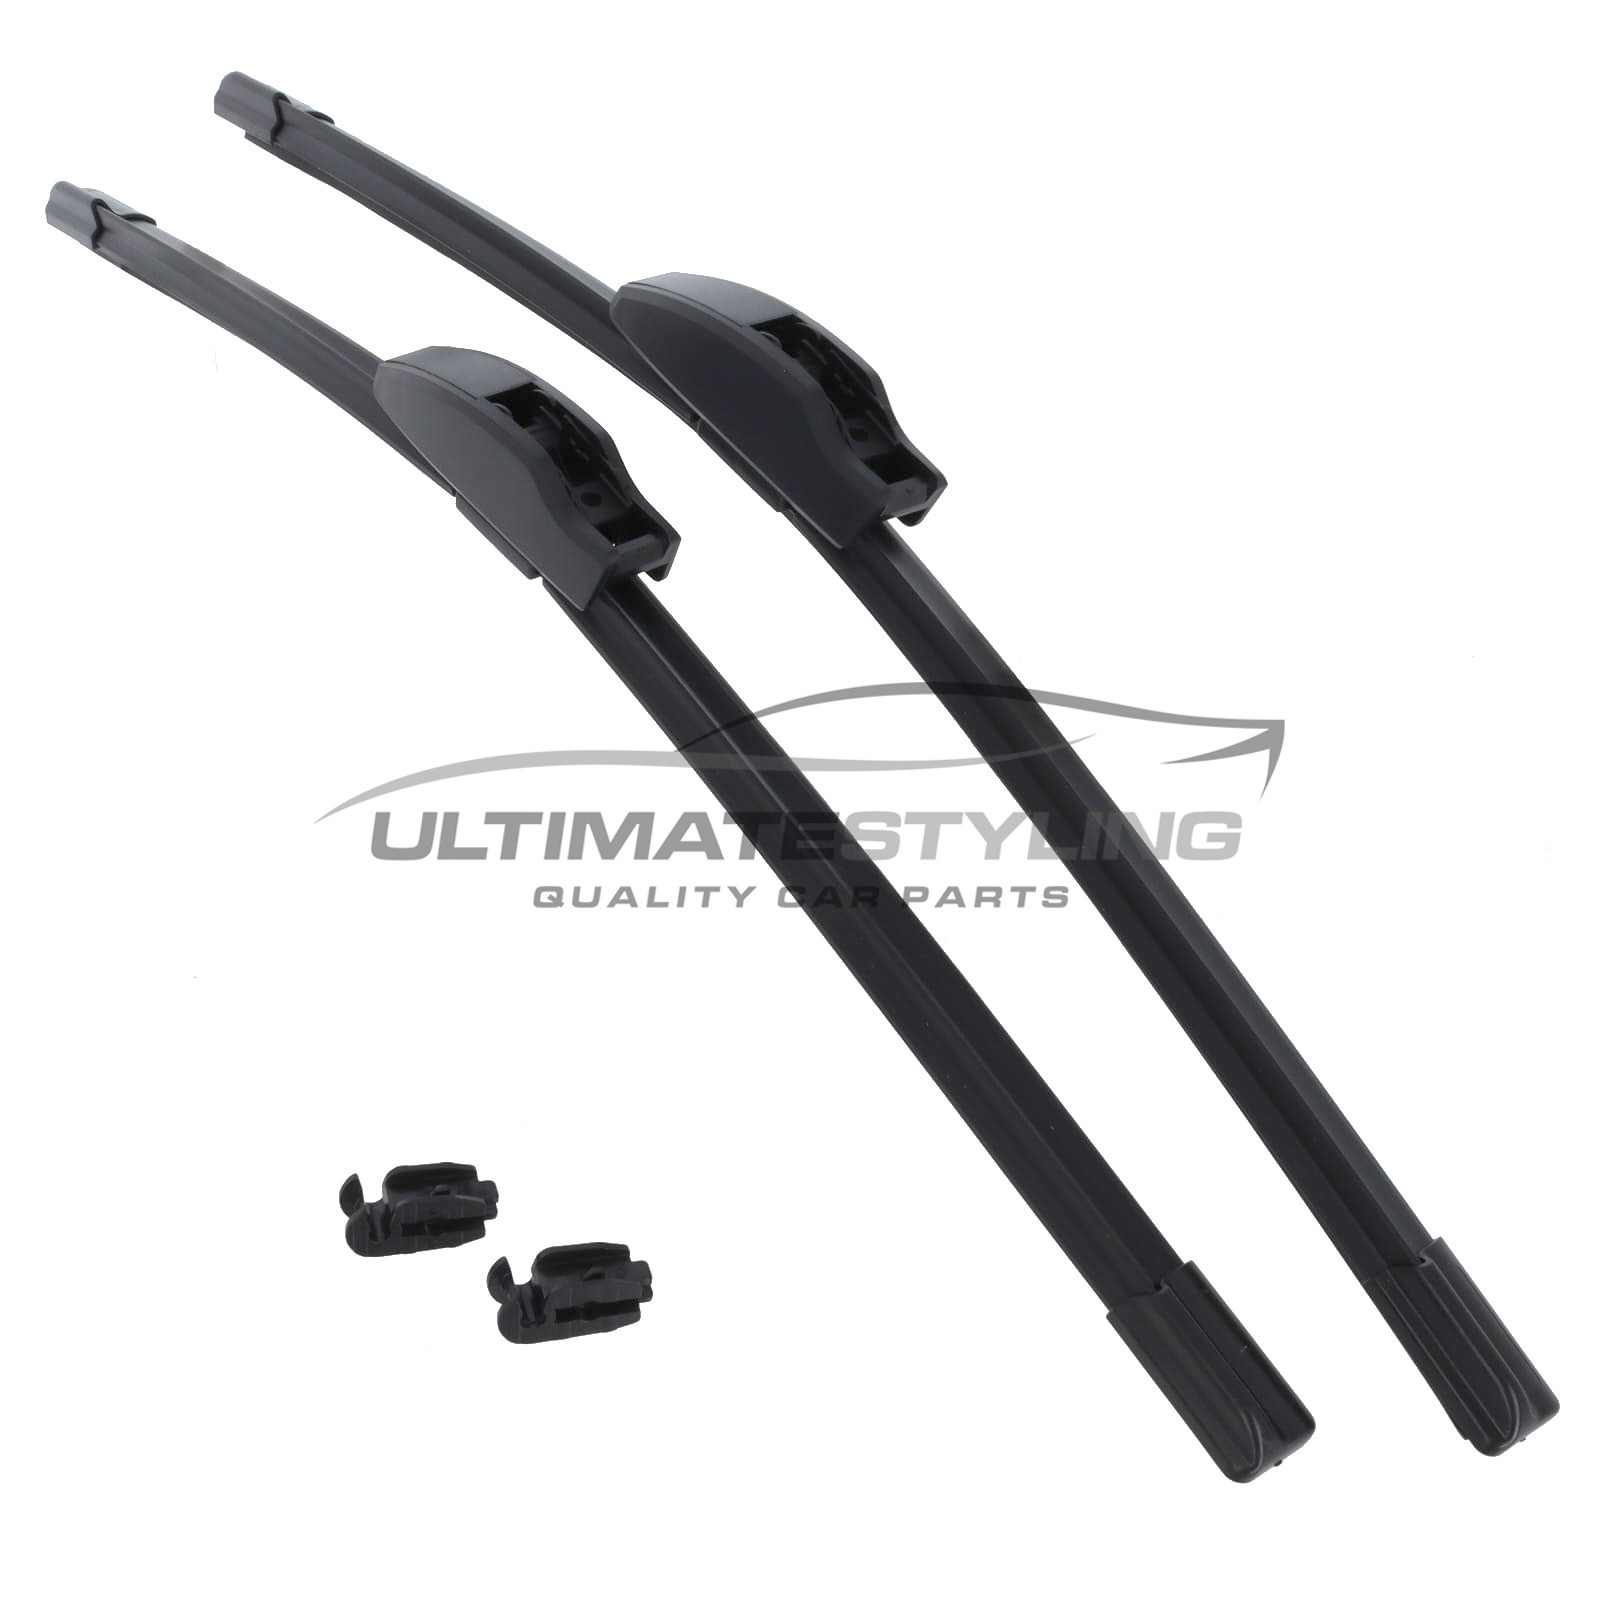 Drivers Side & Passenger Side (Front) Wiper Blades for Rover 400 Series